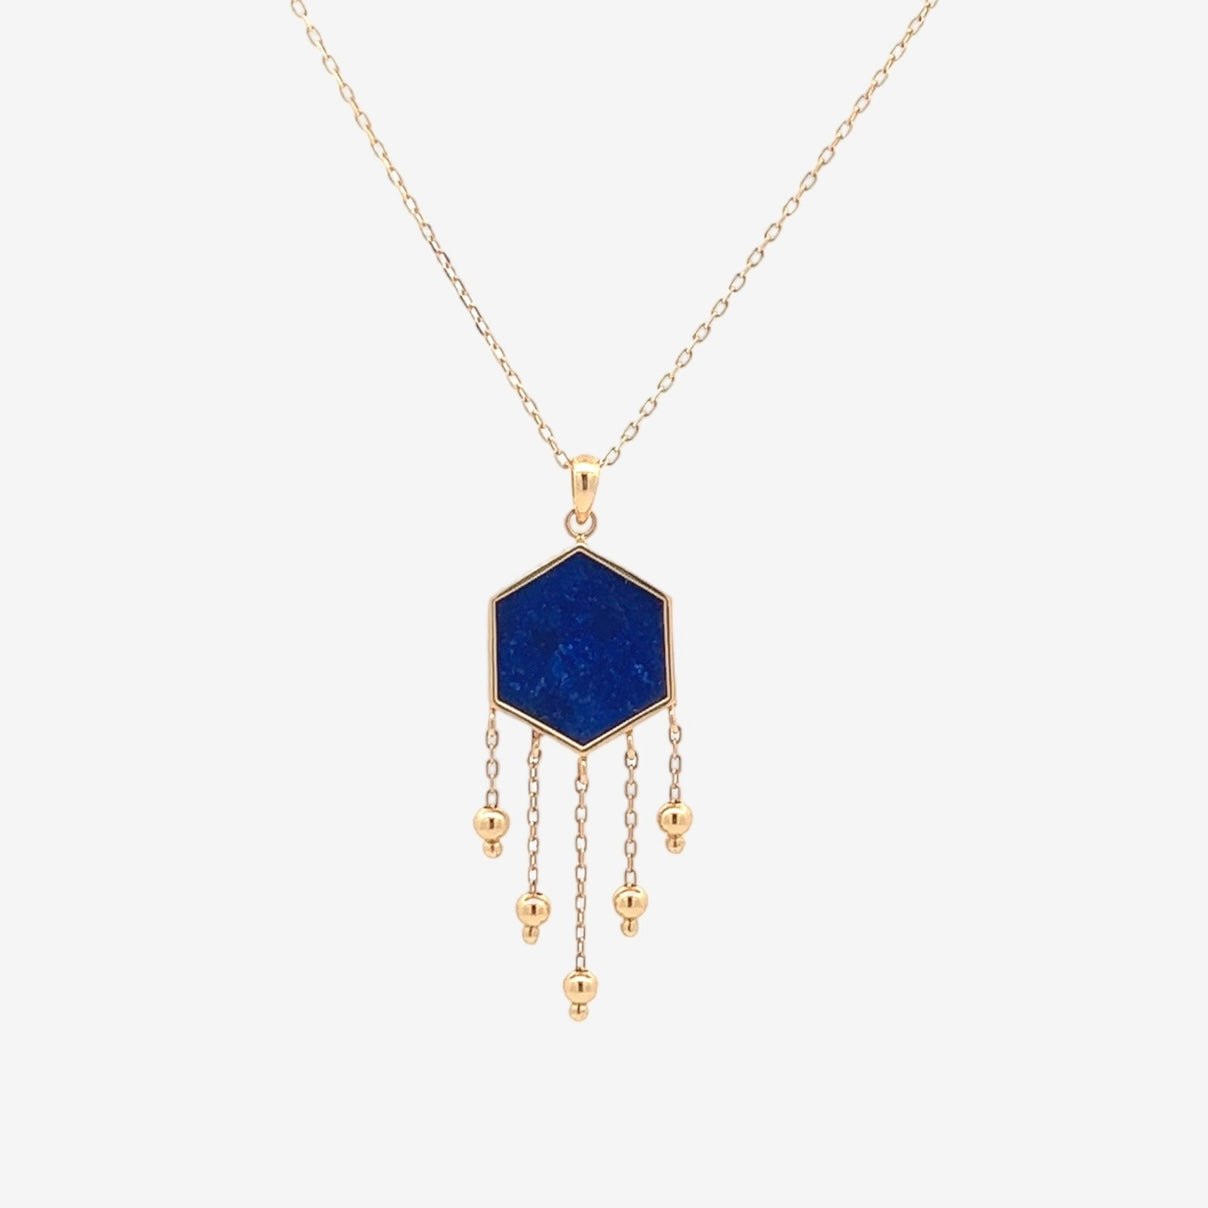 Hexa Necklace in Lapis Lazuli - 18k Gold - Ly